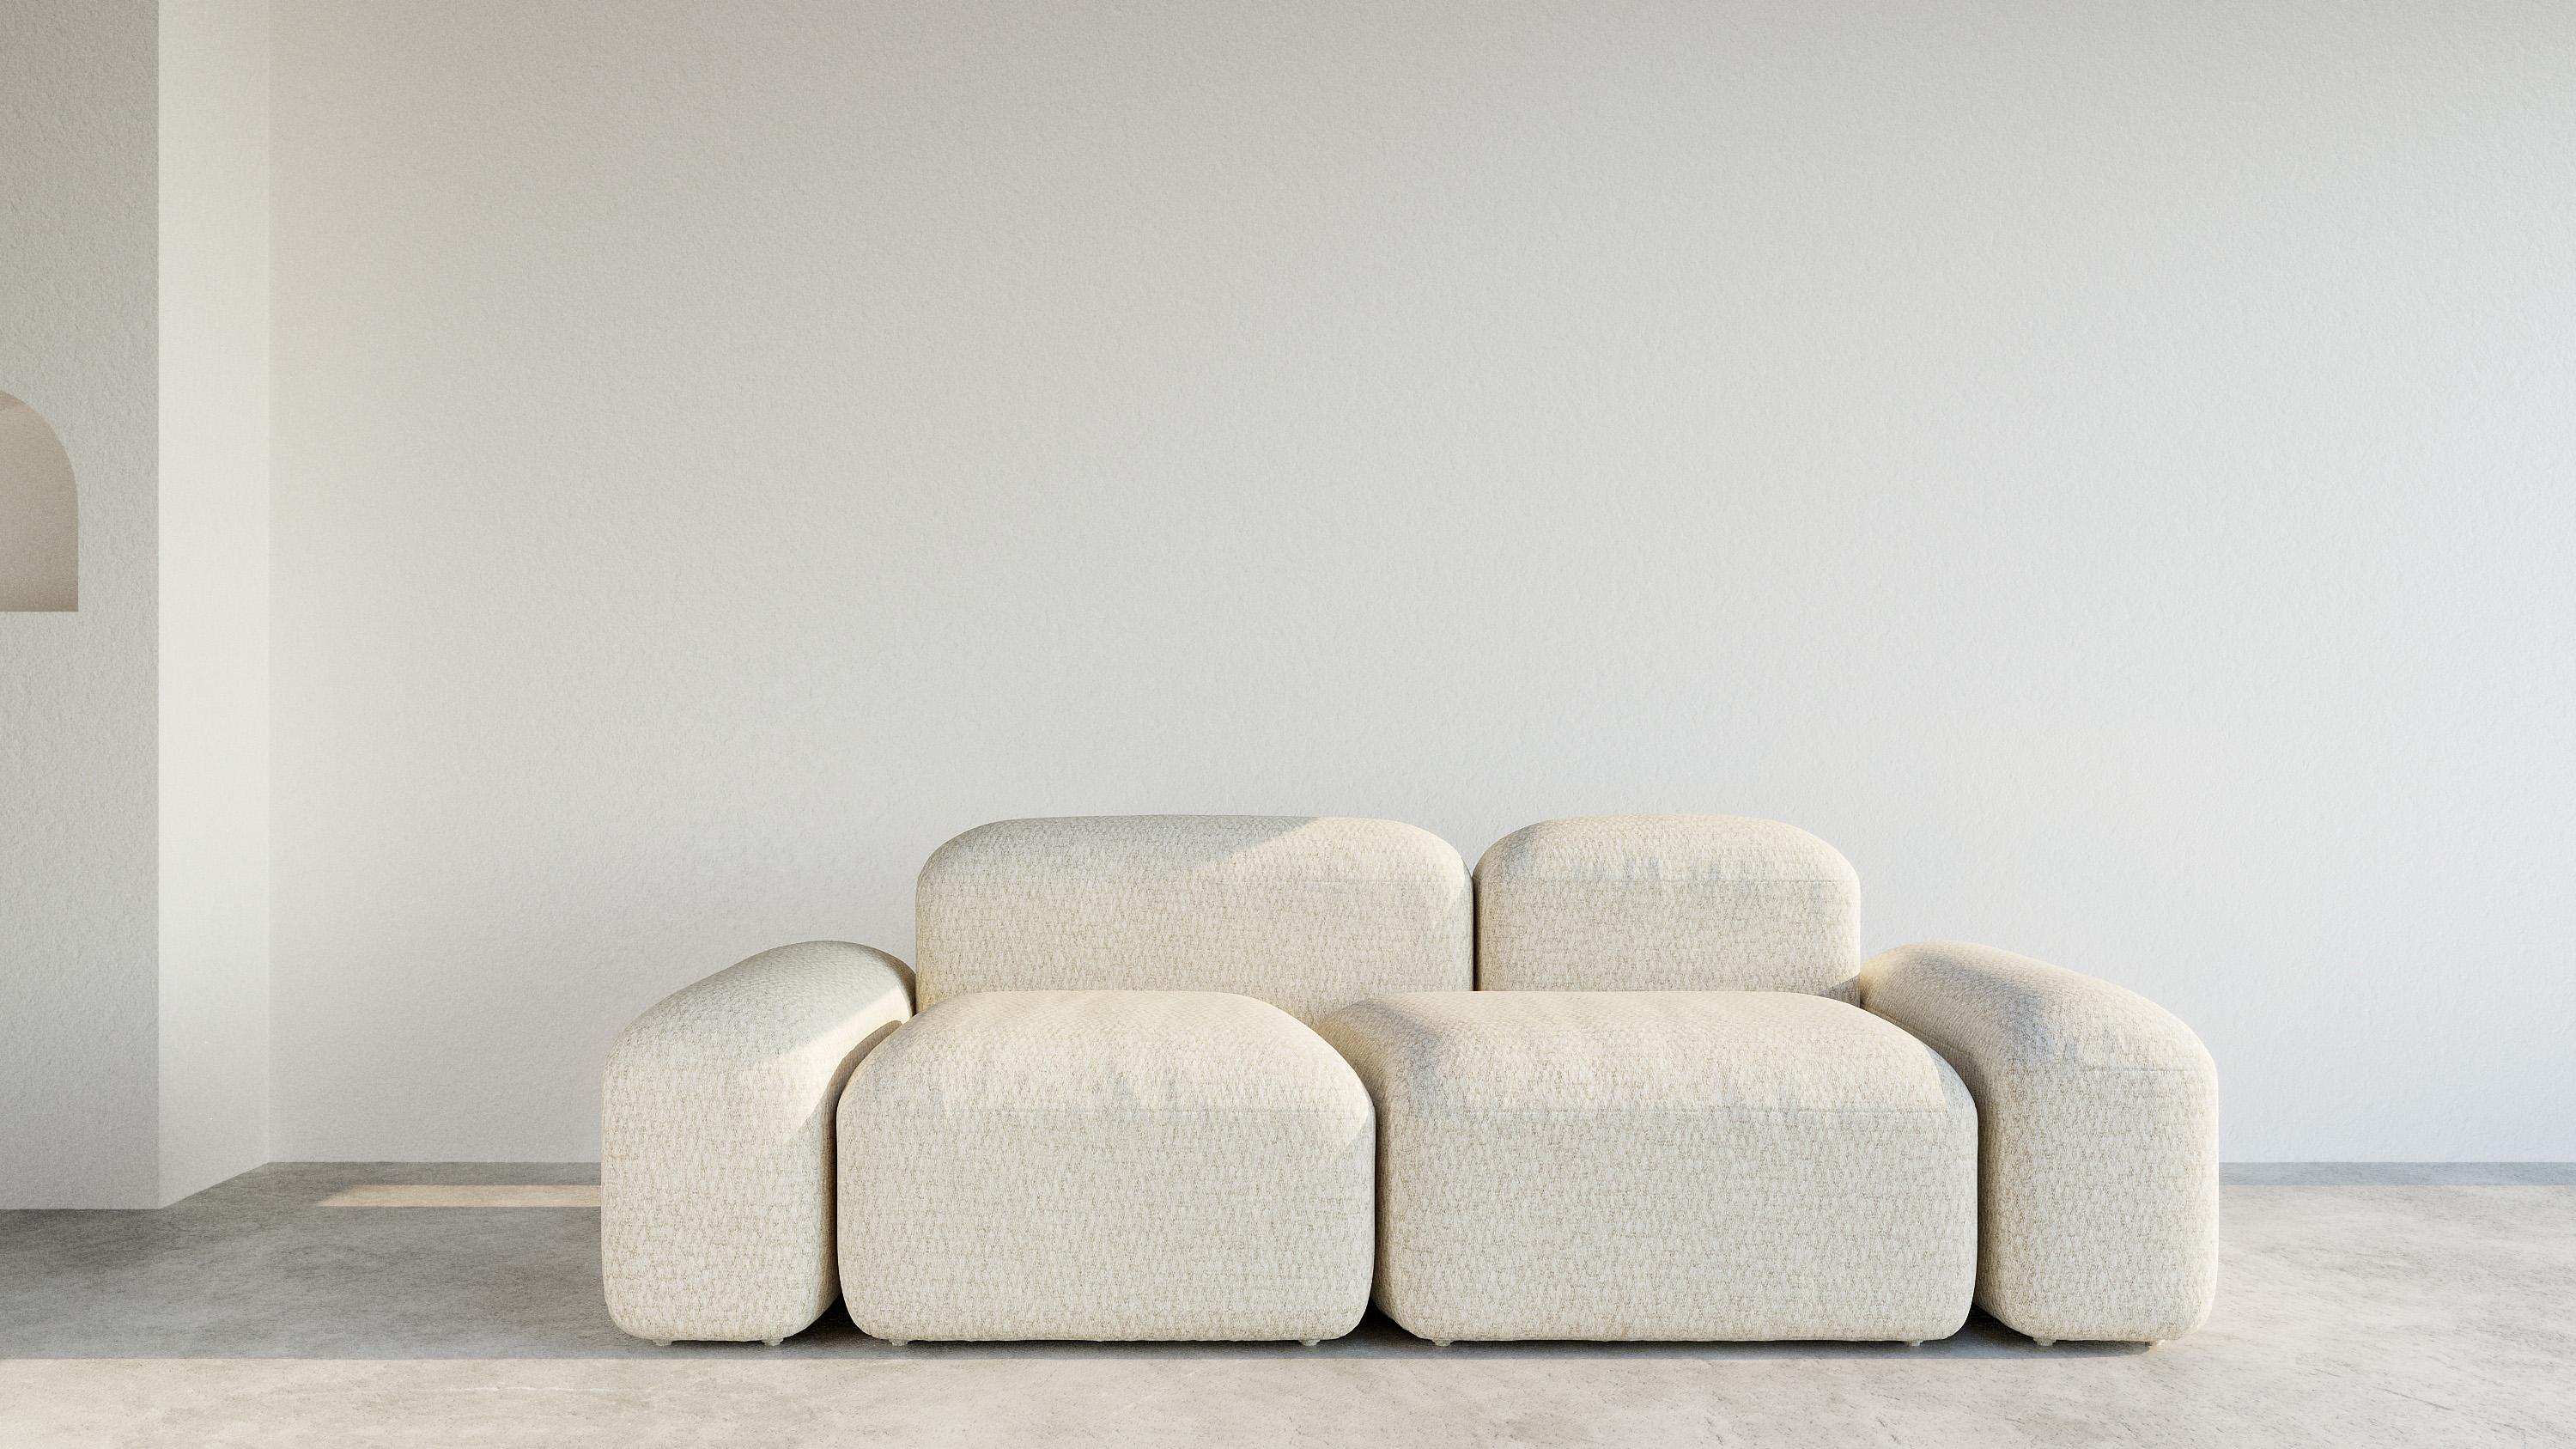 'Lapis' is a collection of sofas and seats with very organic and Minimalist shapes. 
Designer: Emanuel Gargano
Maker: Amura Lab 

LAPIS 030
2 seaters / 222cm L

'Lapis' can be made in several dimension and combinations, according to spaces